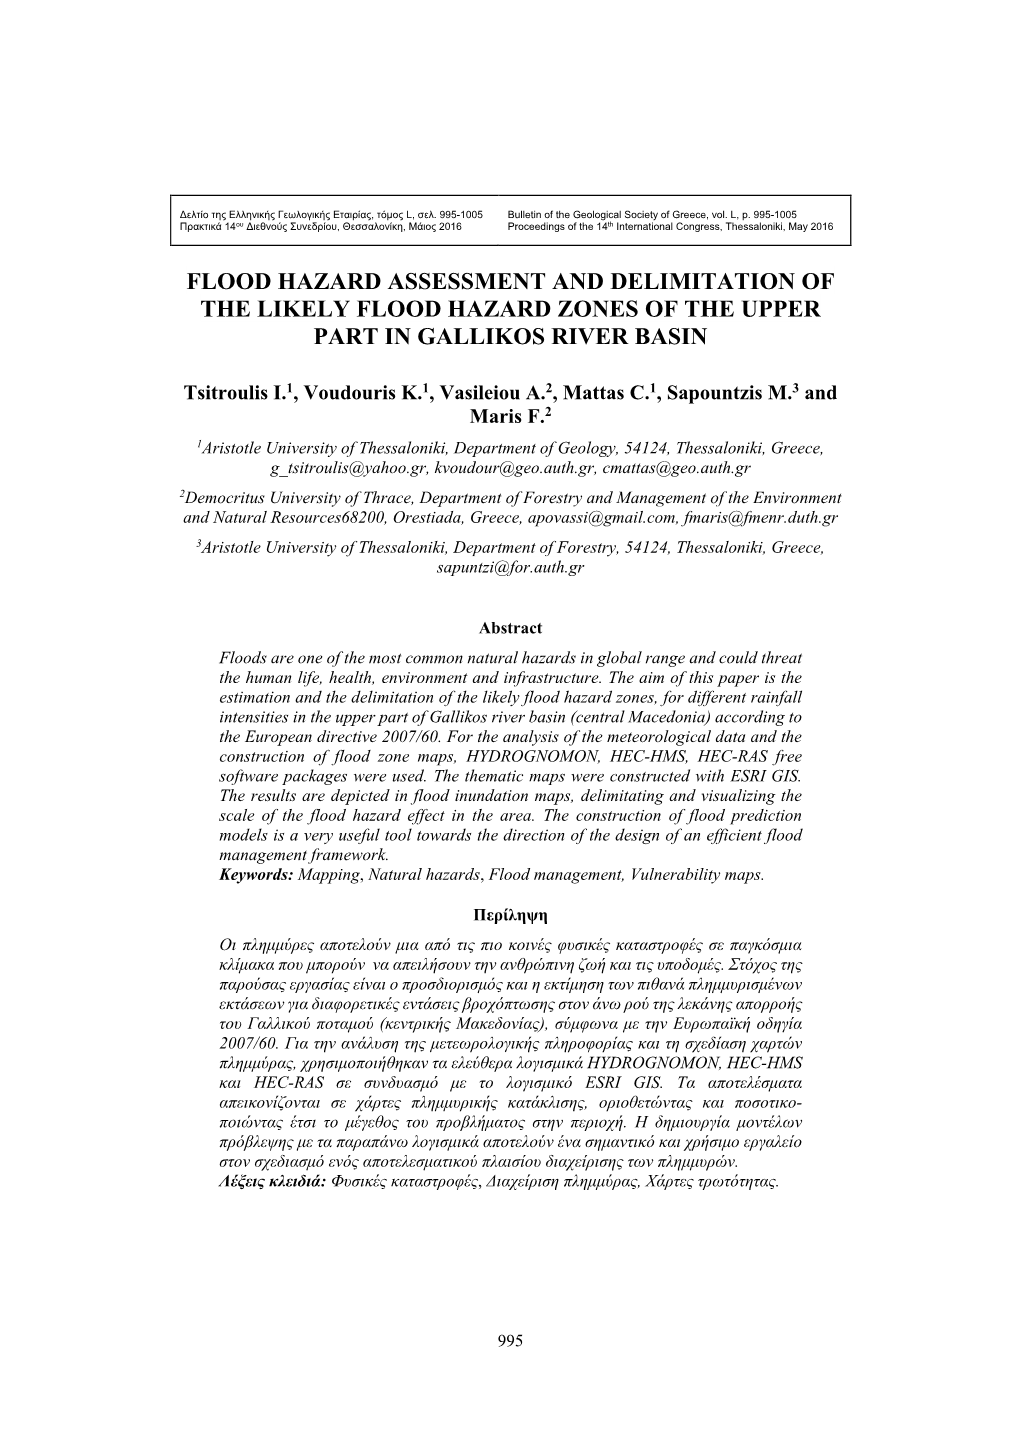 Flood Hazard Assessment and Delimitation of the Likely Flood Hazard Zones of the Upper Part in Gallikos River Basin